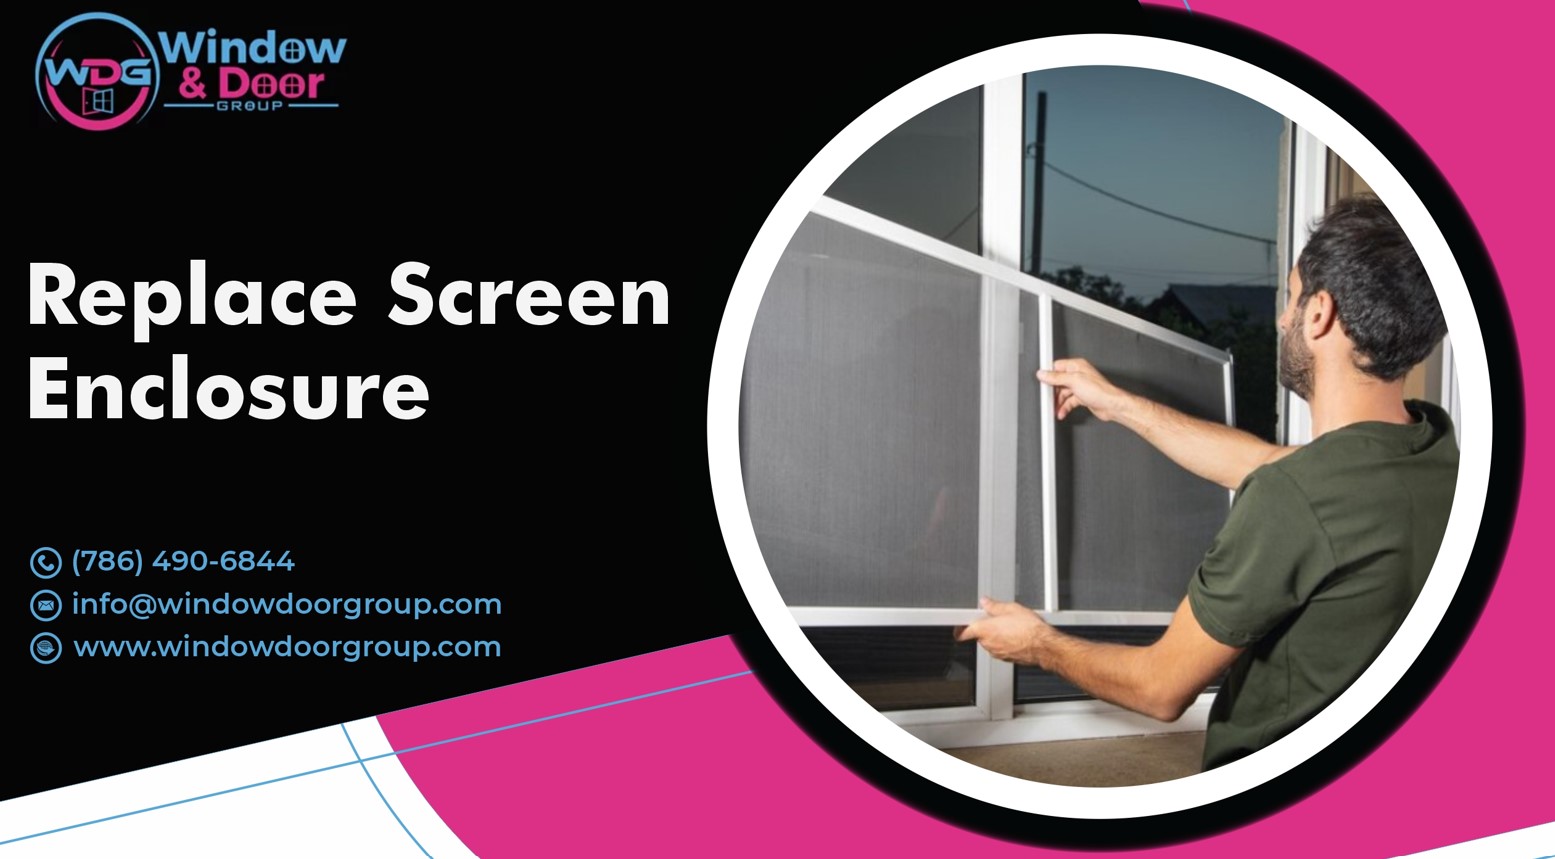 6 Signs You Should Replace Screen Enclosure Now